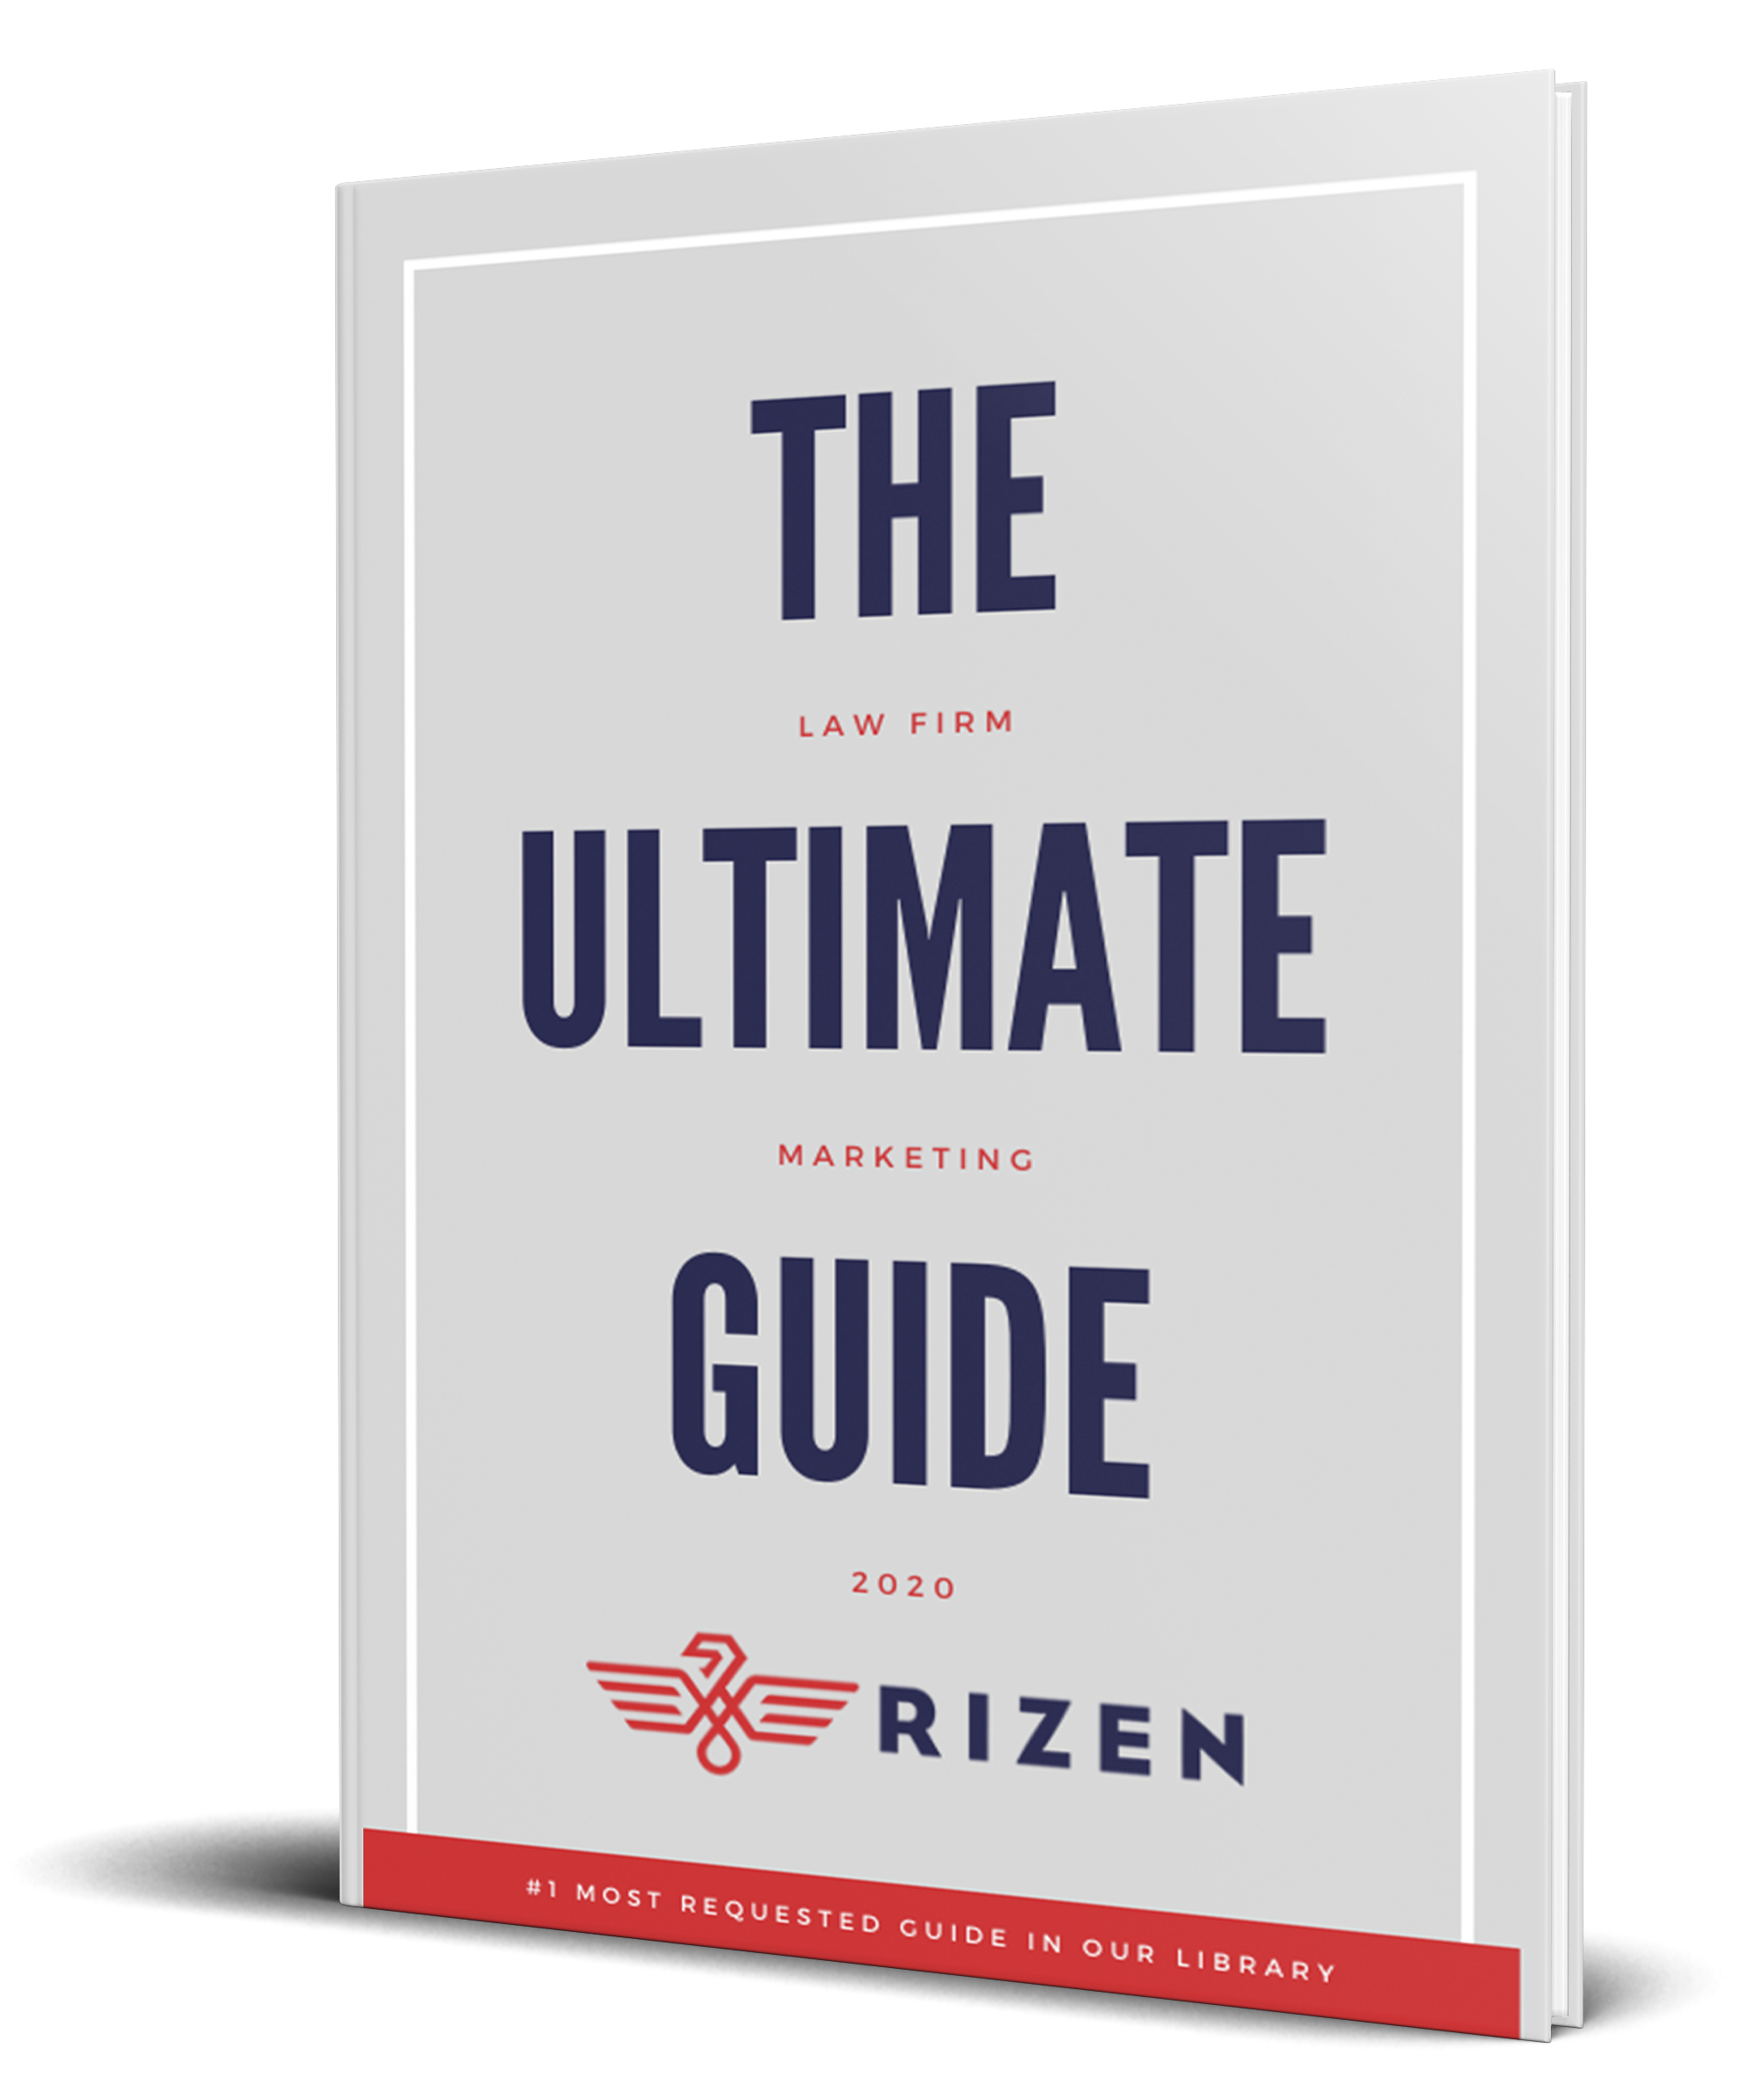 The Ultimate Guide to Law Firm Marketing in 2020